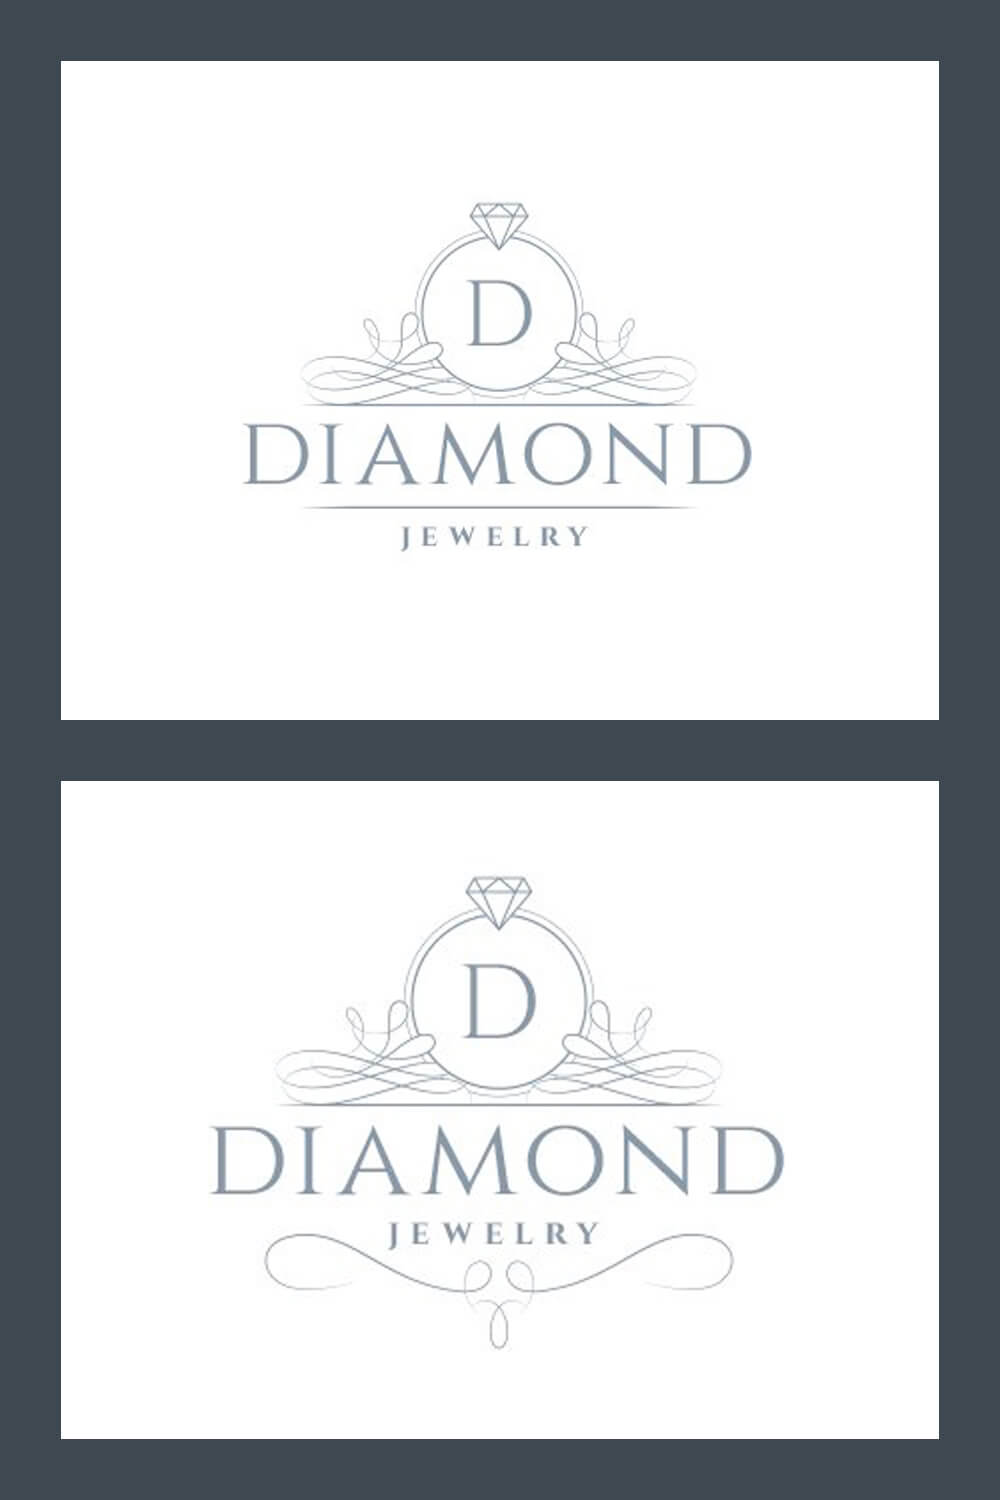 Two large white diamond jewelry logos on a gray background.